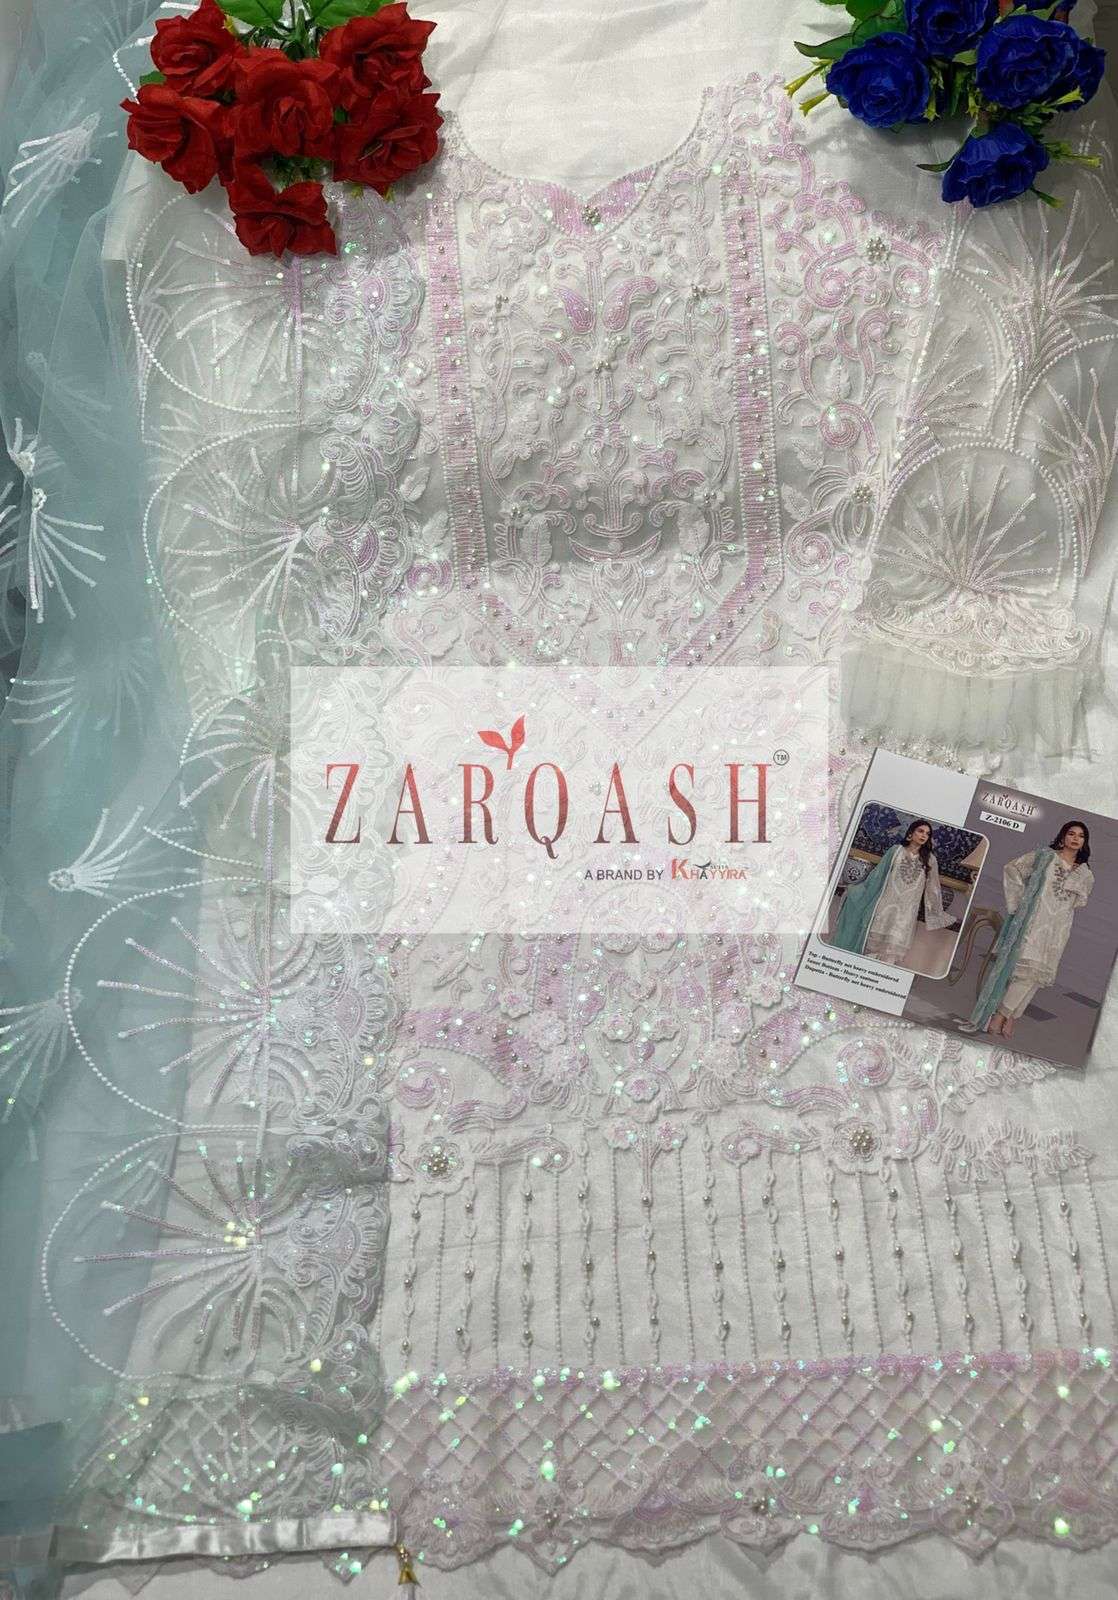 zarqash mirha 2106 series butterfly net with embroidered work salwar suits surat